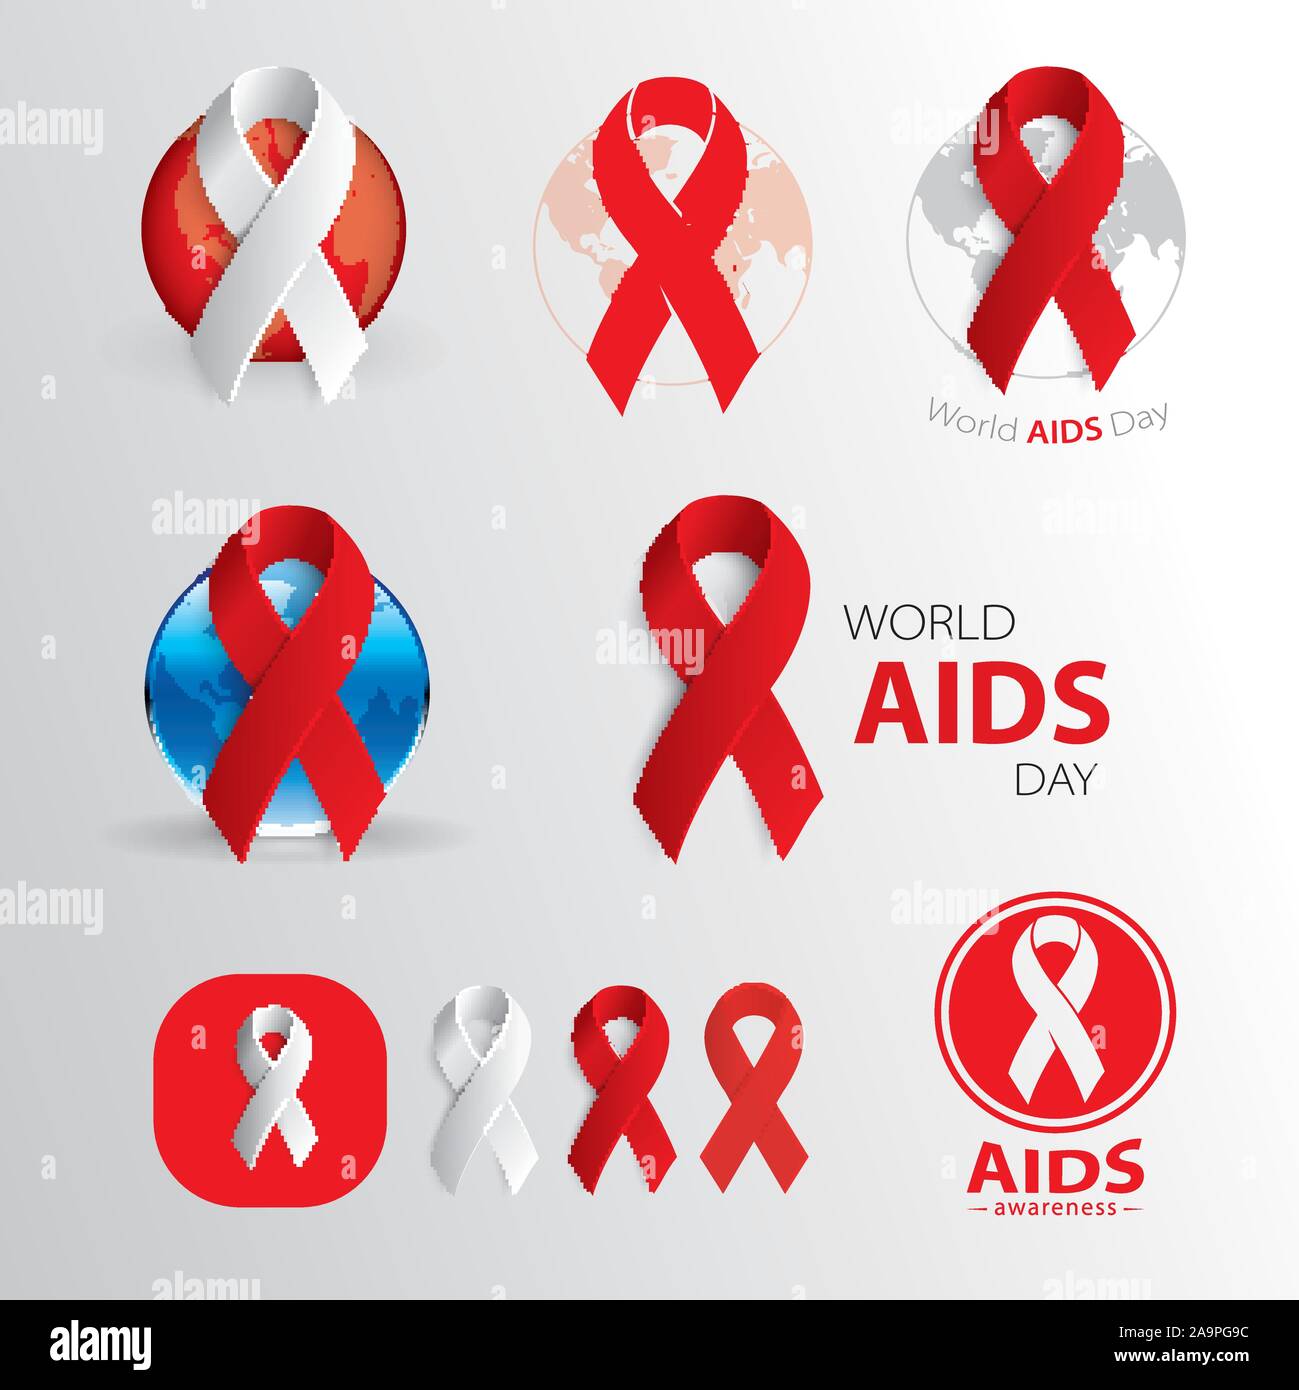 World AIDS day. AIDS awareness. Medical signs. Vector icons. Stock Vector